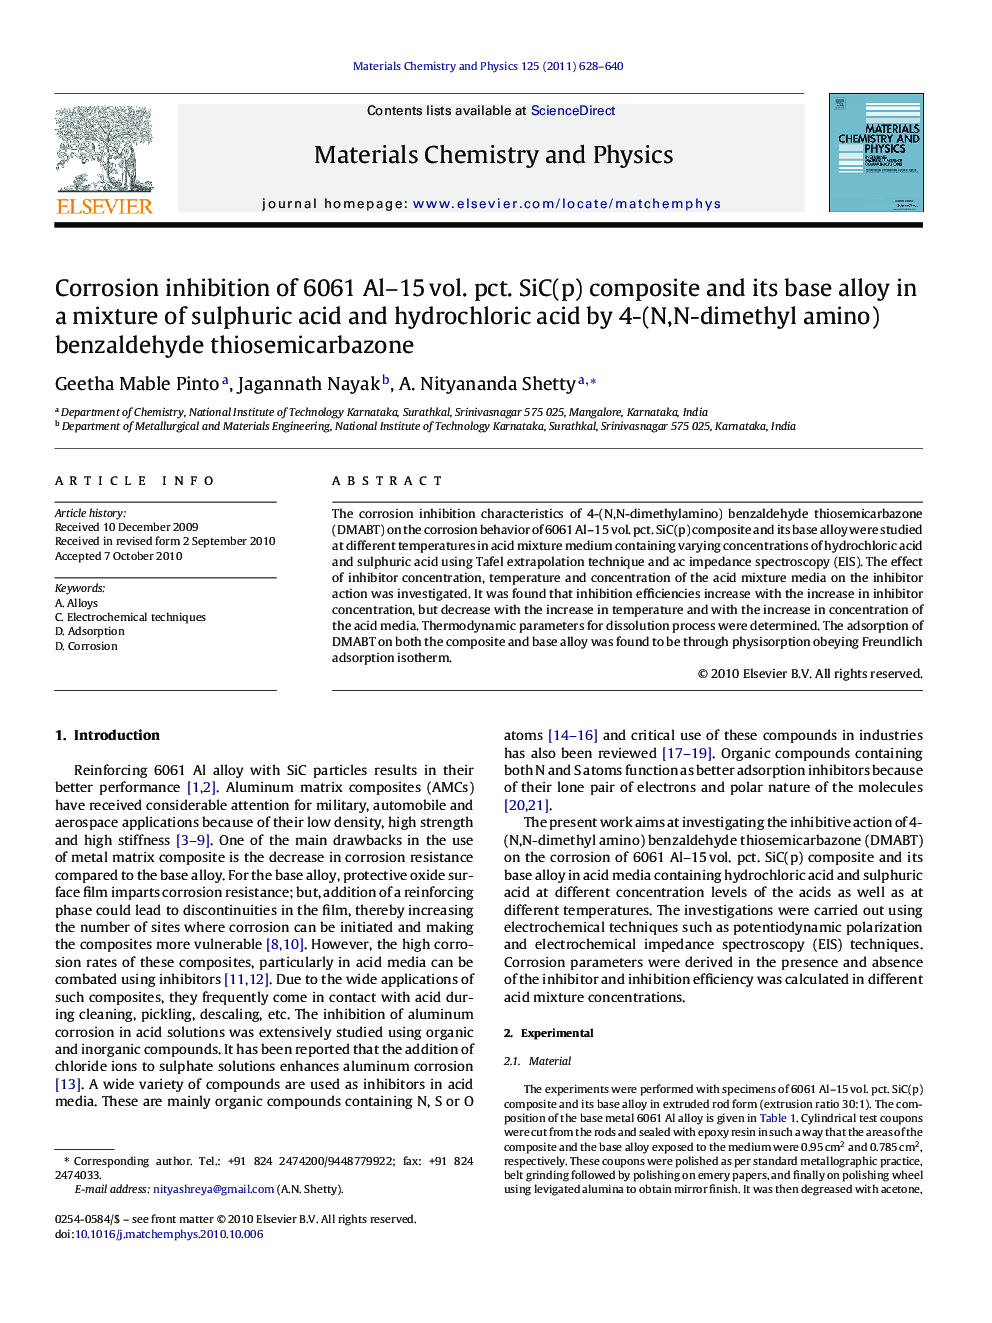 Corrosion inhibition of 6061 Al-15Â vol. pct. SiC(p) composite and its base alloy in a mixture of sulphuric acid and hydrochloric acid by 4-(N,N-dimethyl amino) benzaldehyde thiosemicarbazone